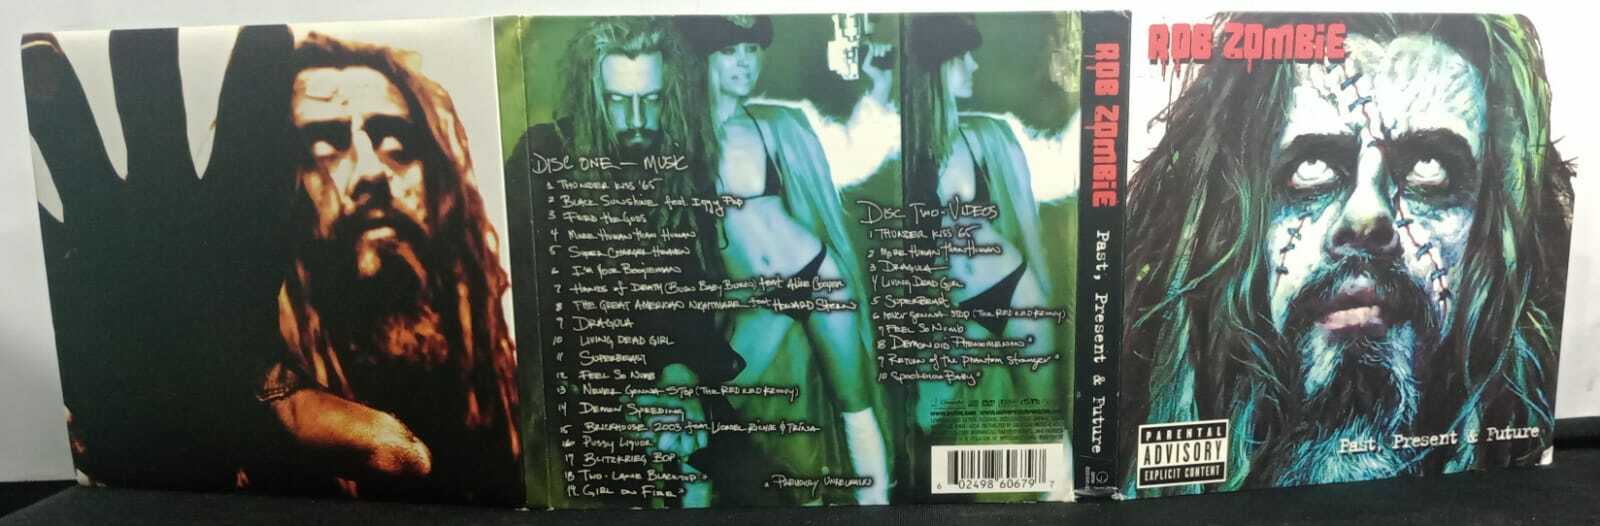 CD - Rob Zombie - Past Present and Future (USA/CD+DVD)